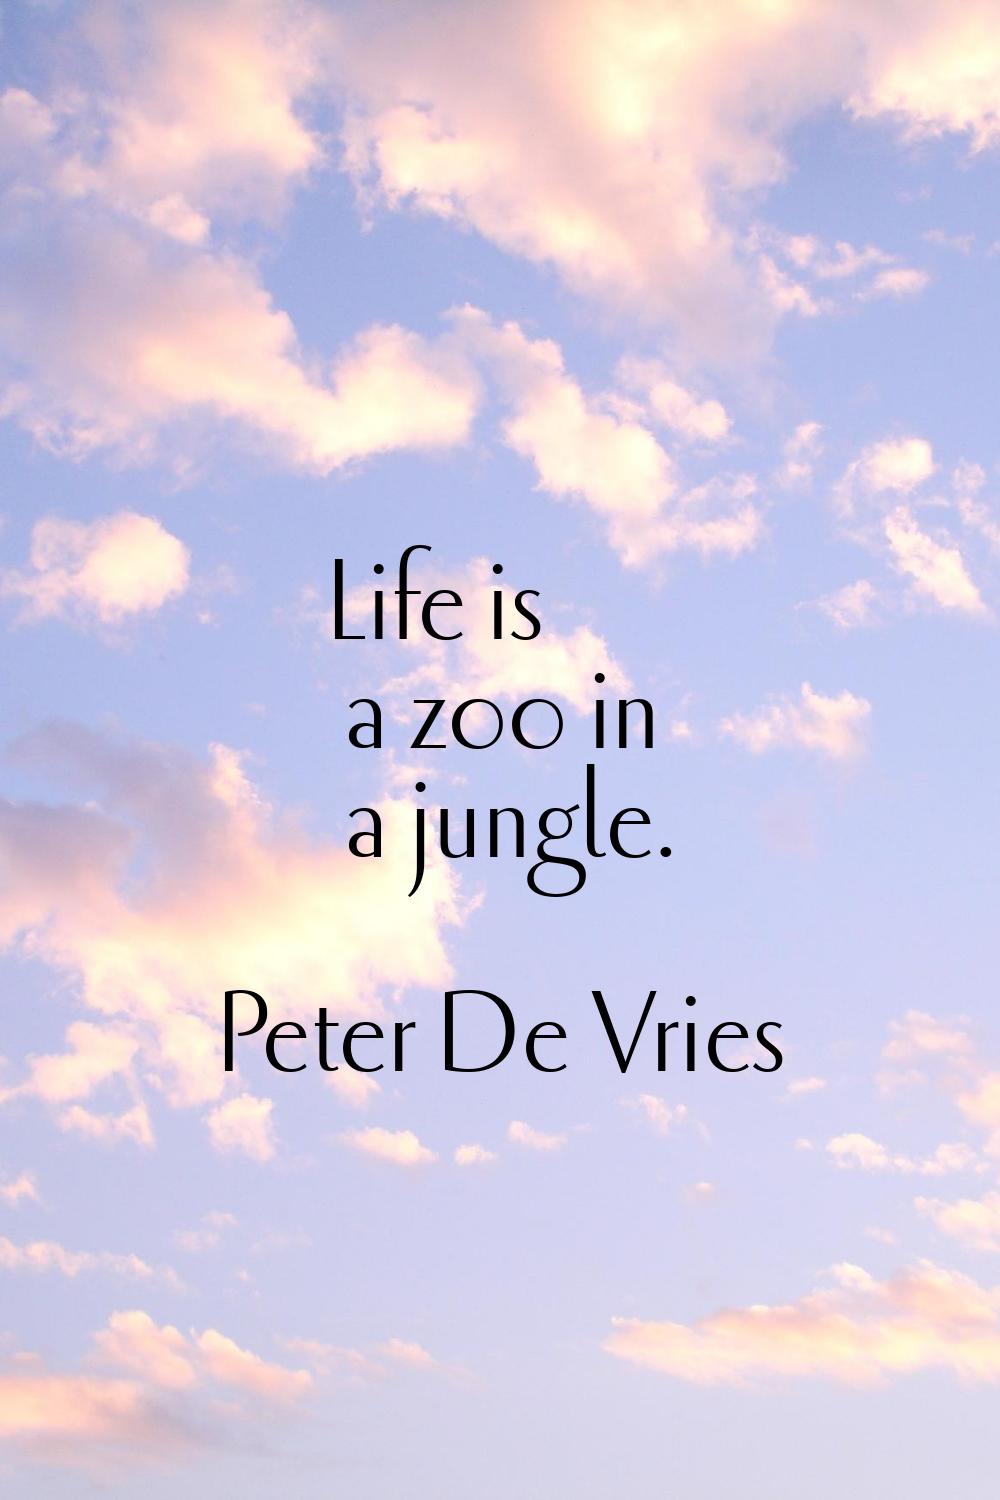 Life is a zoo in a jungle.